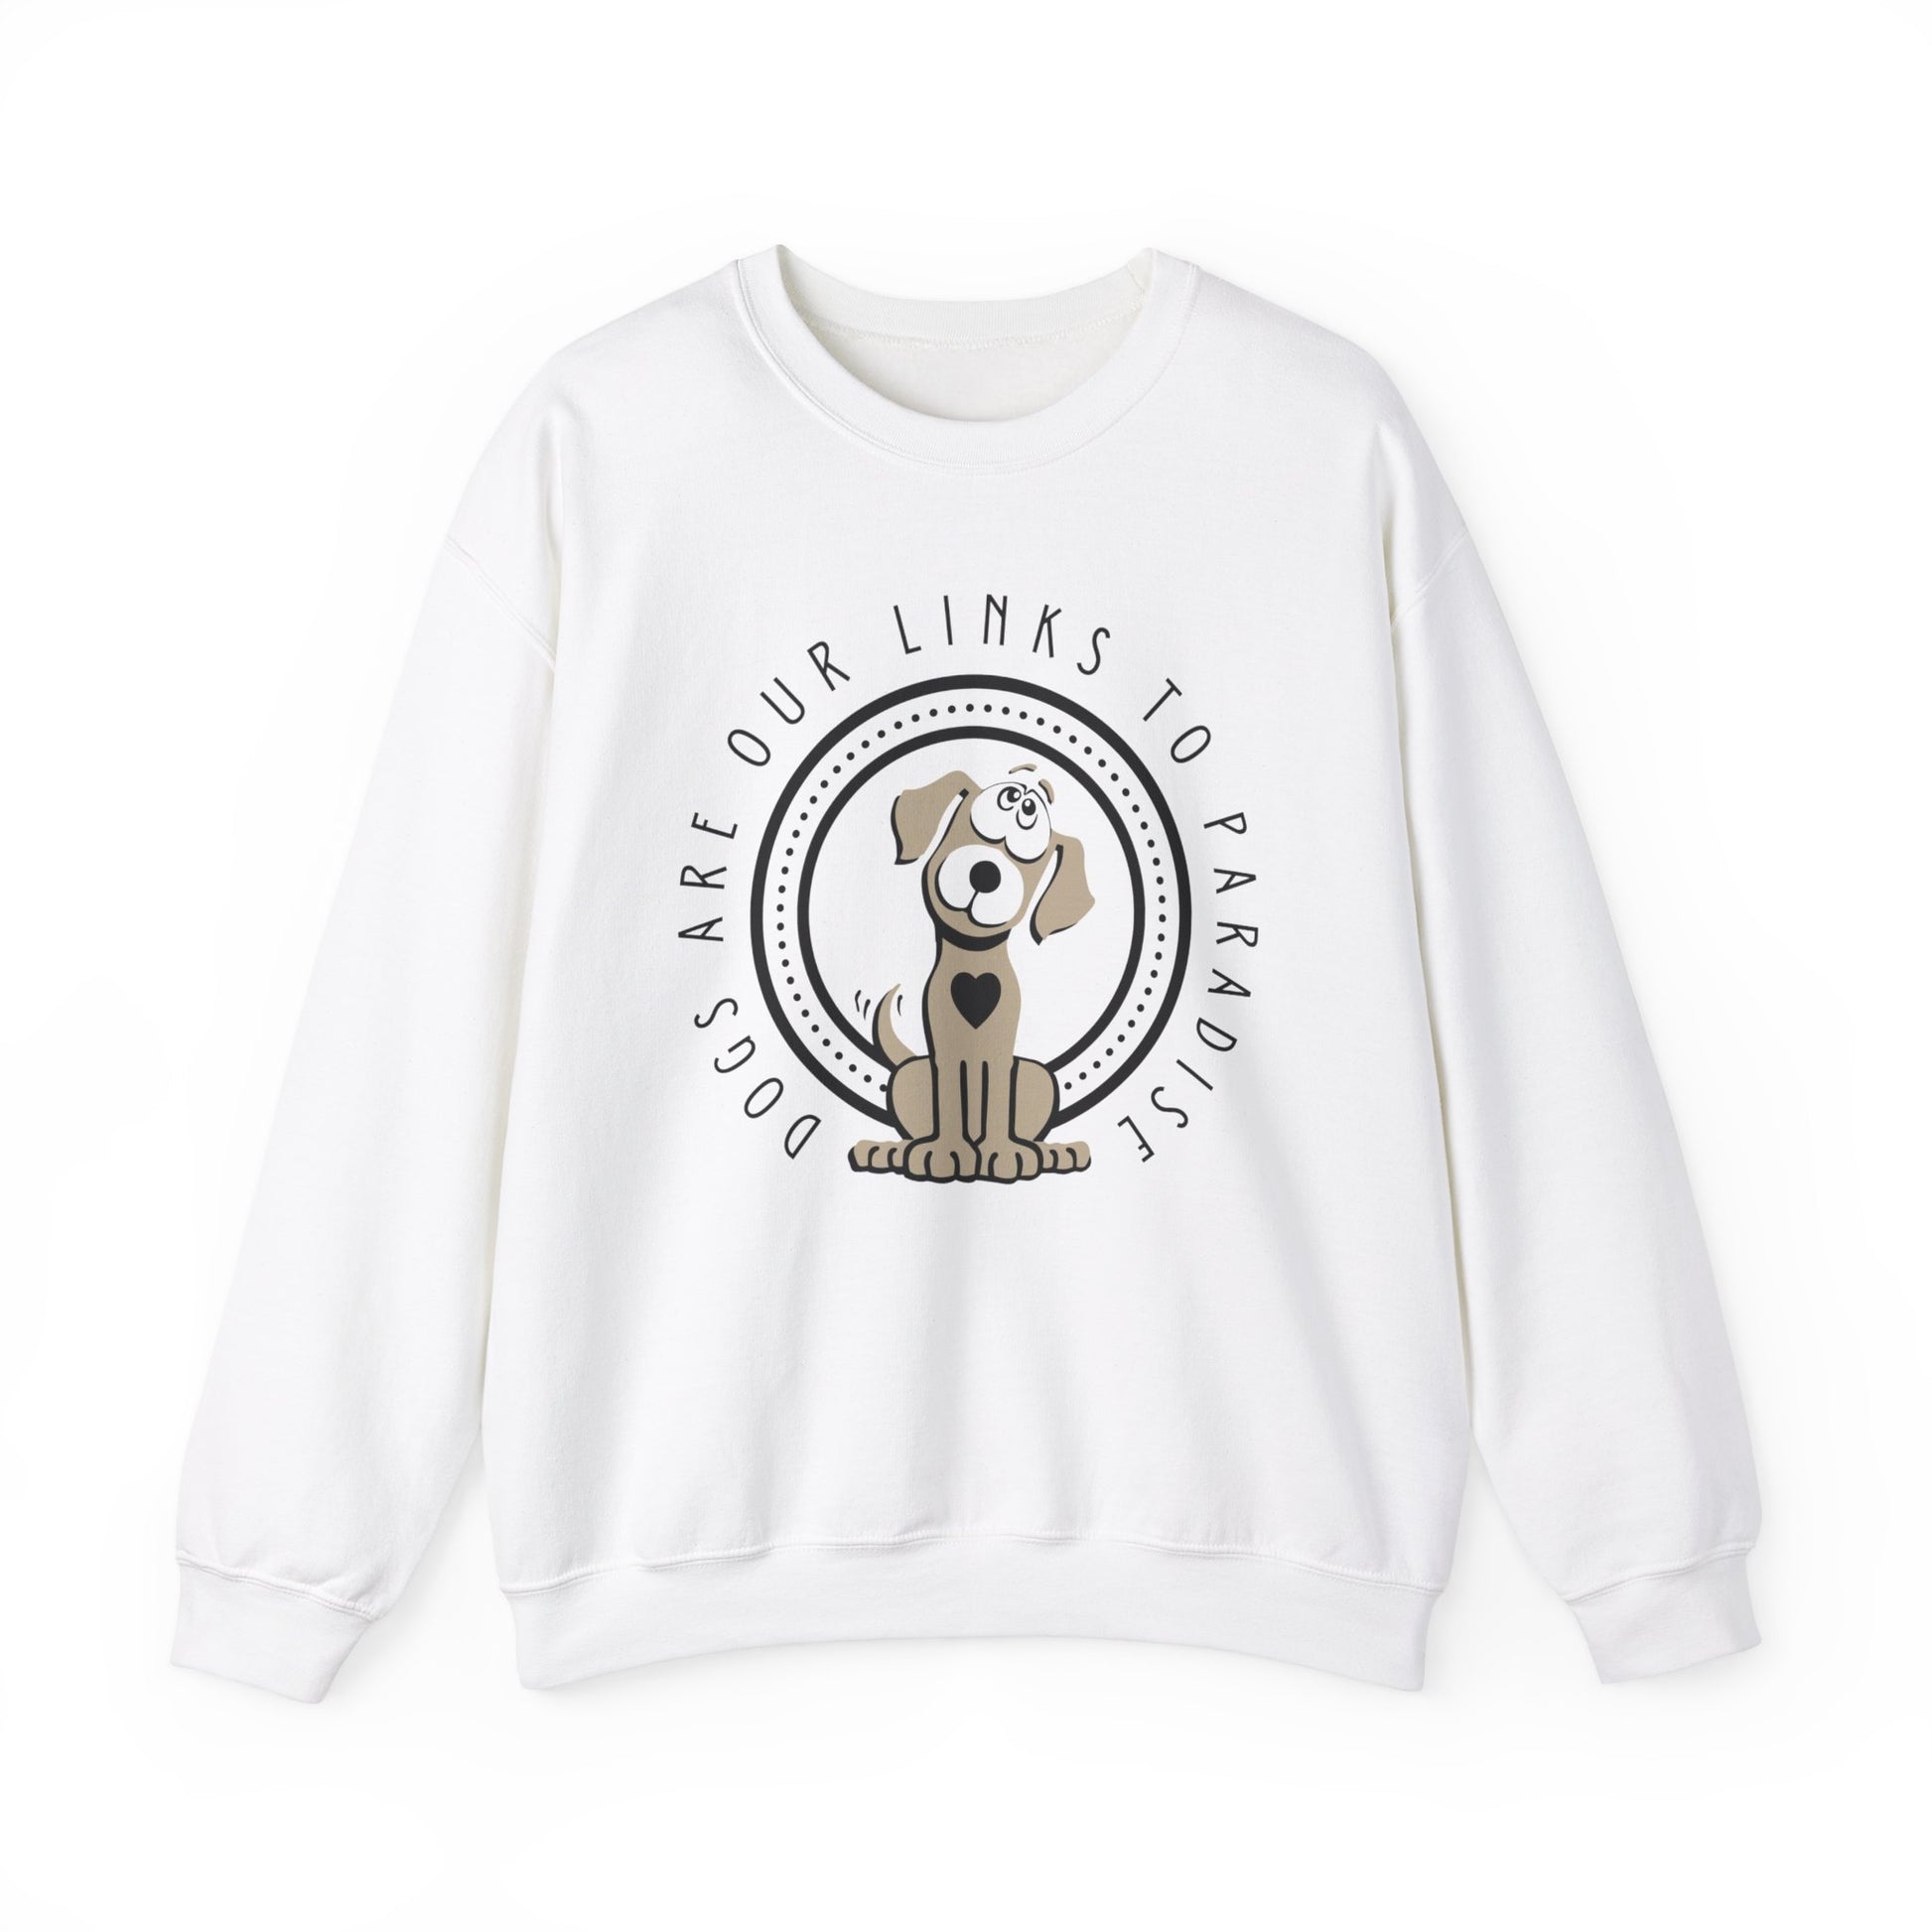 A white Dogs Pure Love design, displaying the charming 'Dogs are Paradise' print, against a crisp white backdrop.